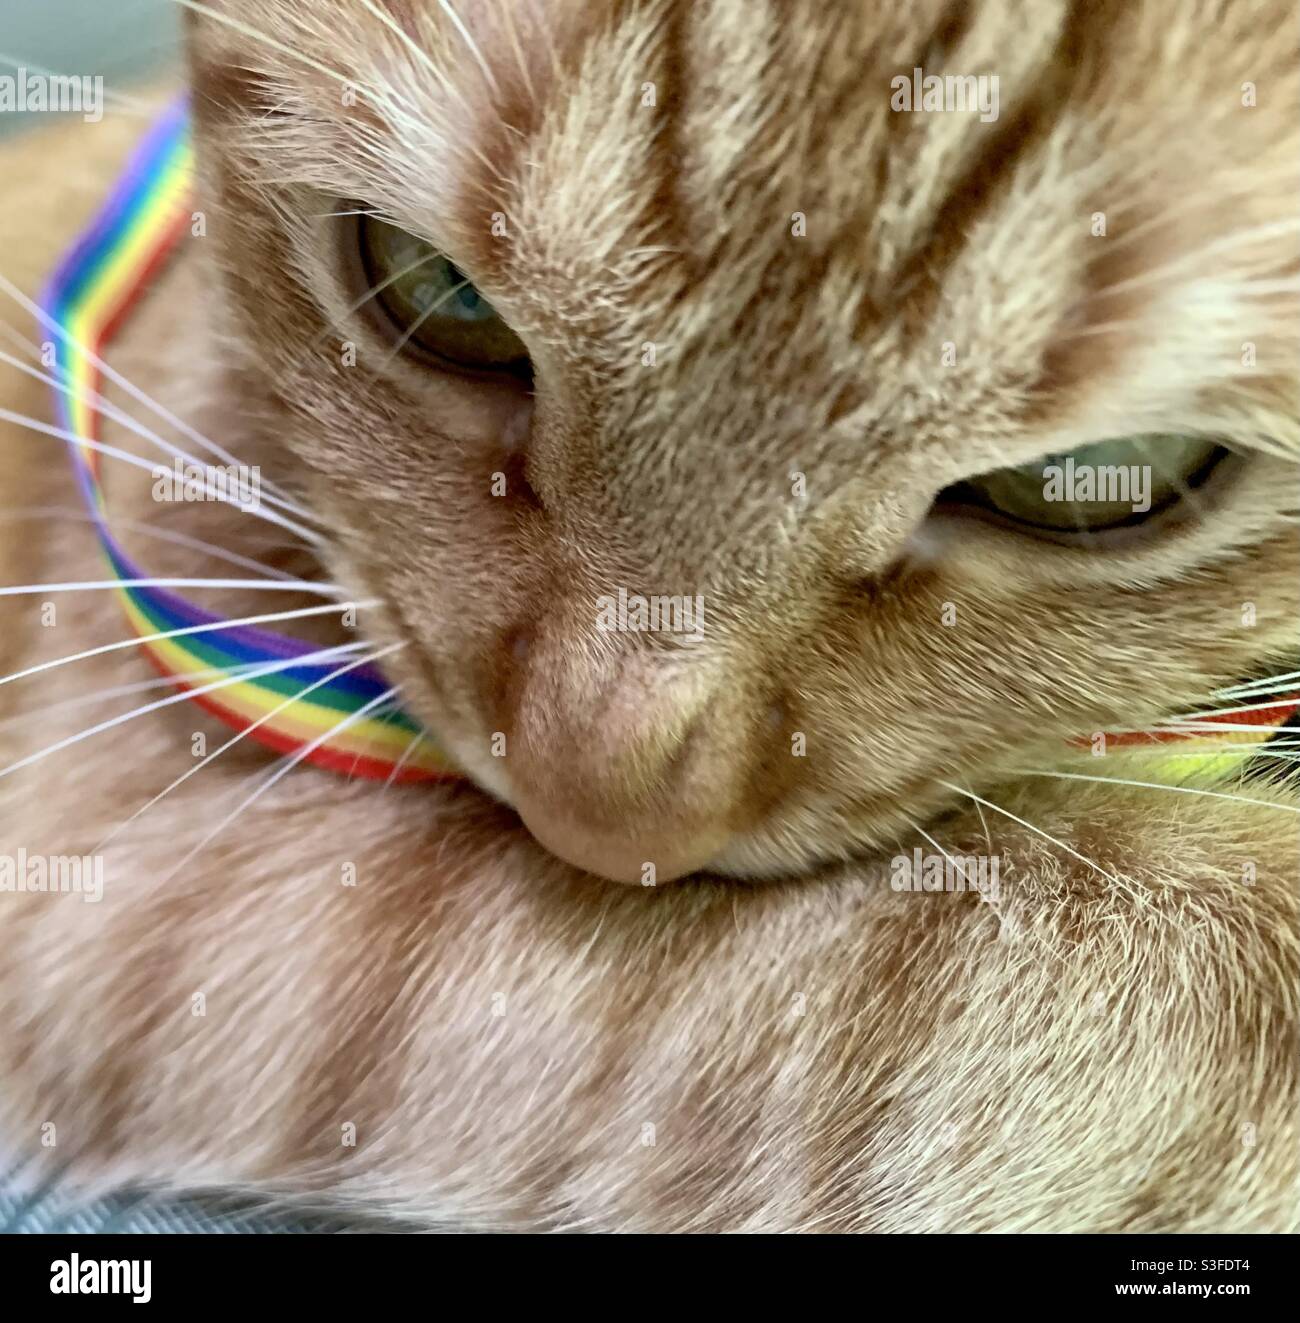 Red domestic cat and rainbow flag Stock Photo